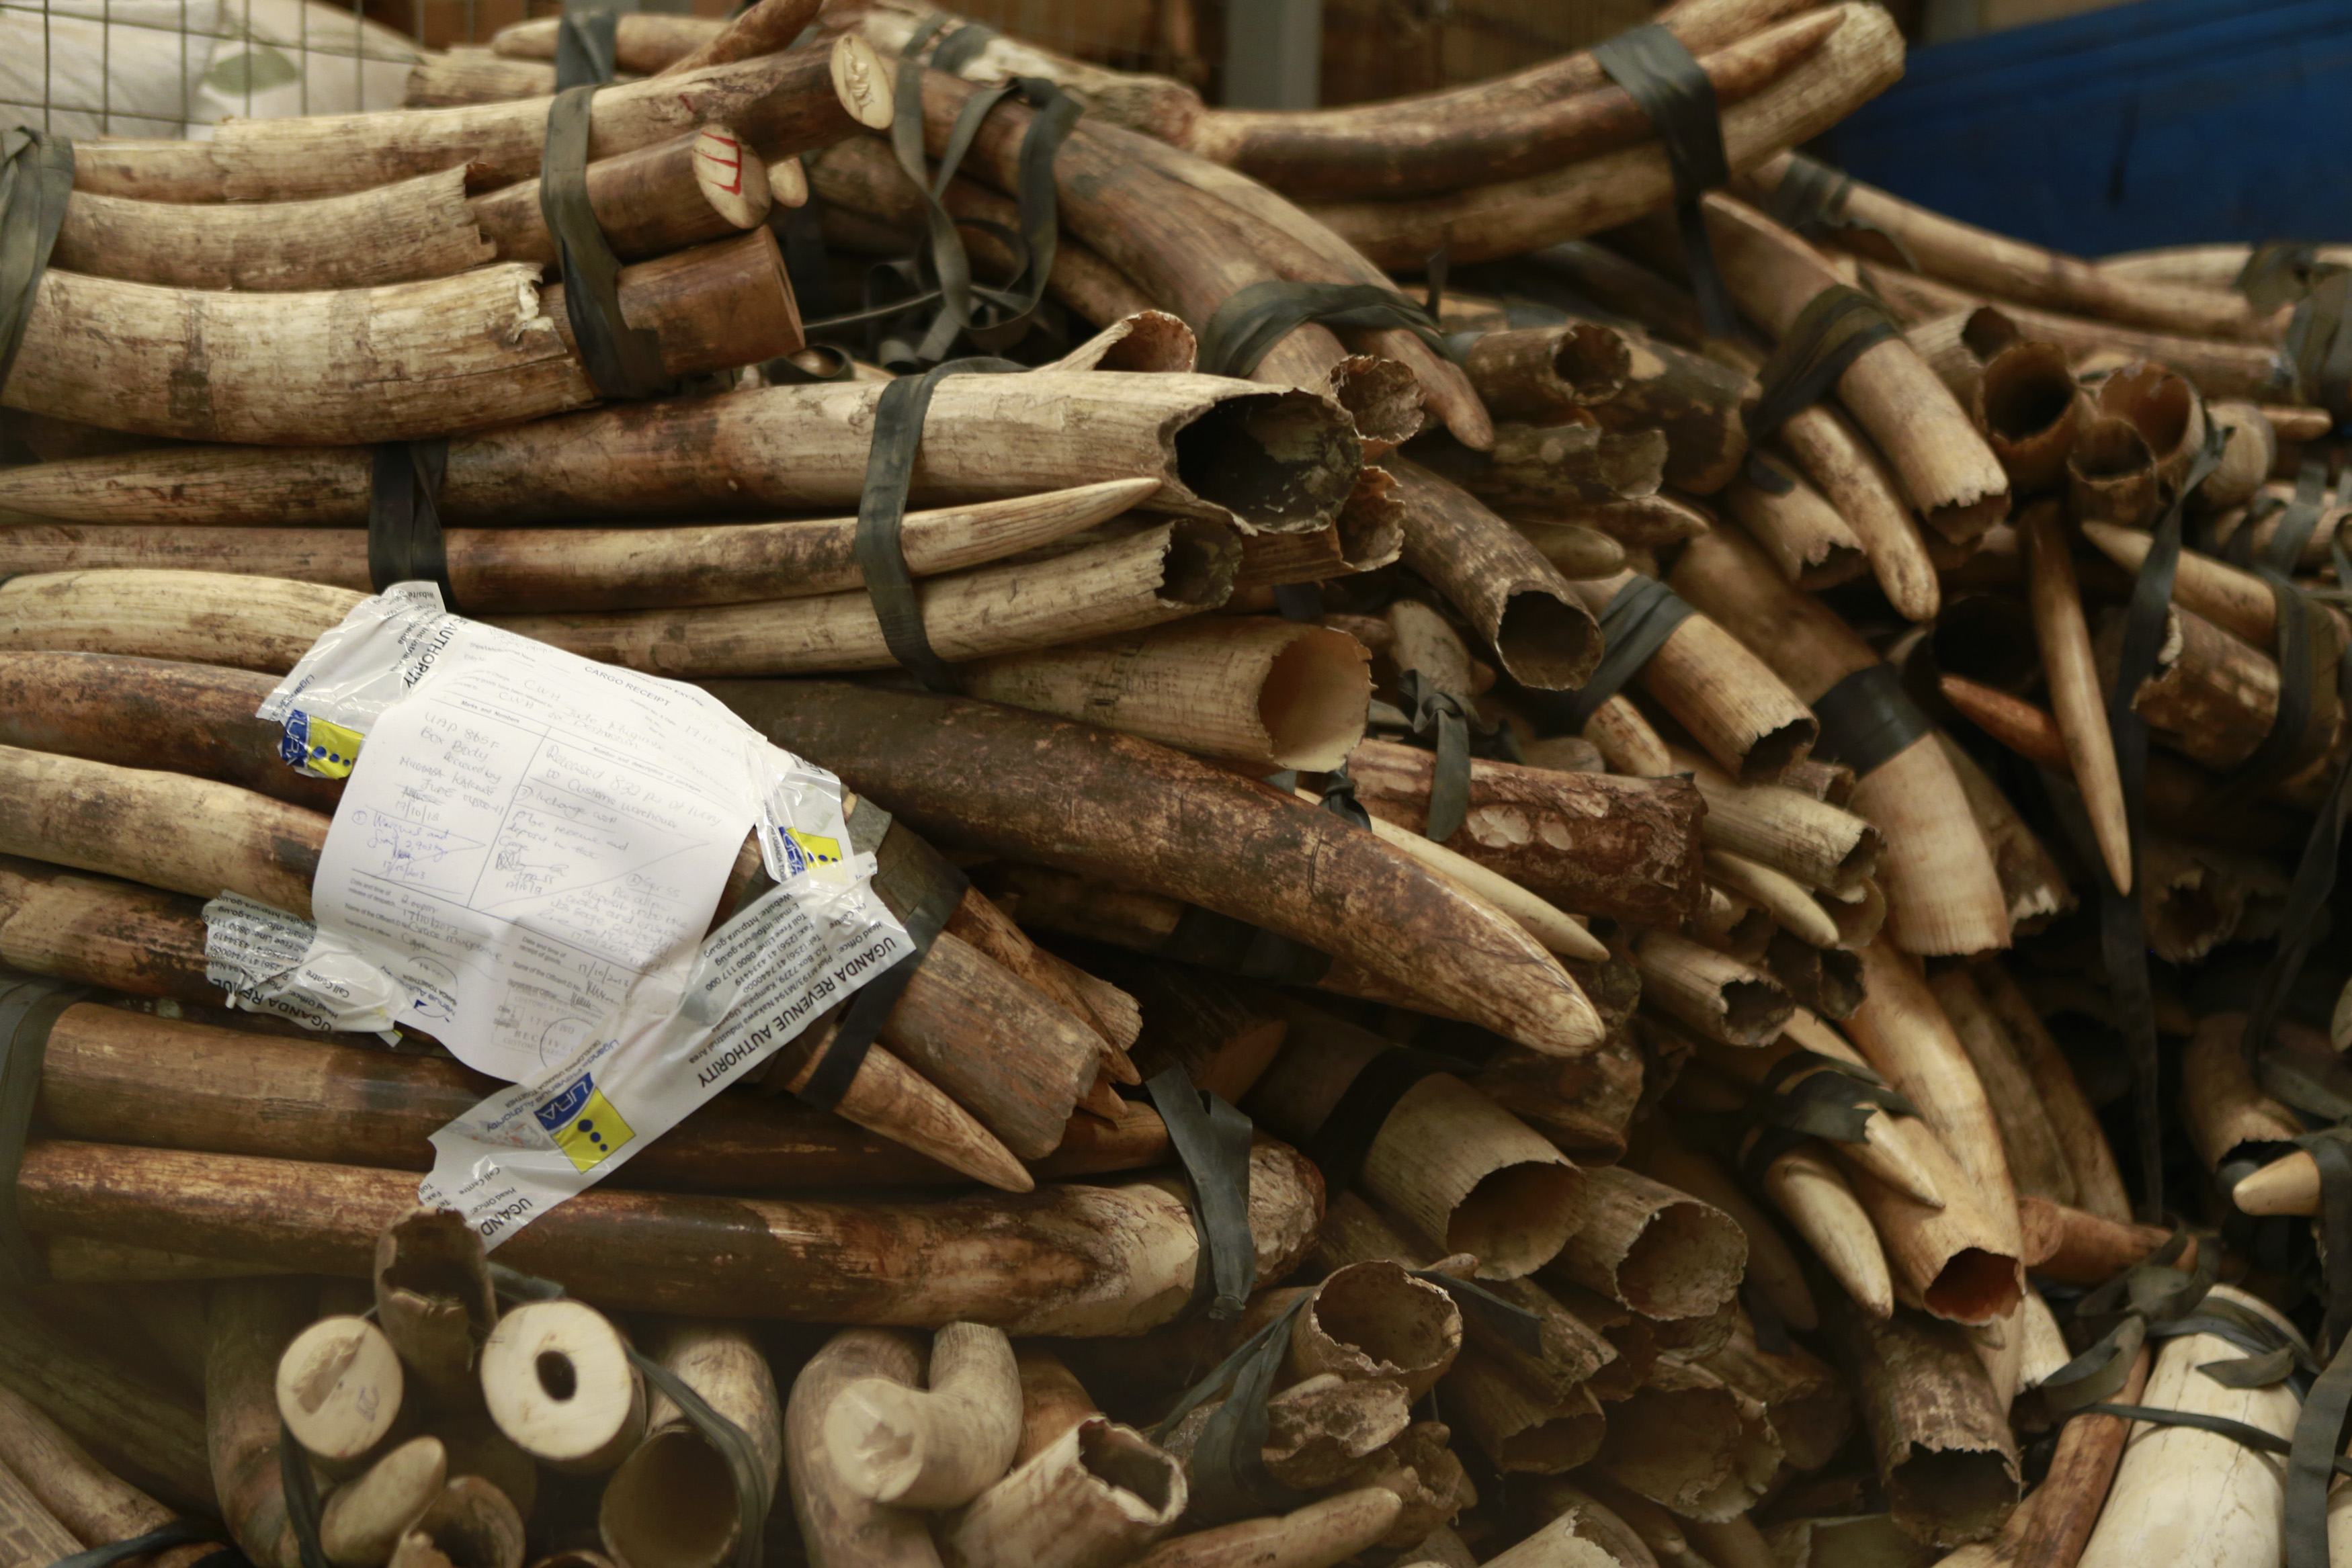 797 elephant tusks hidden in sacks of garlic were seized in three raids on the house of Chinese nationals. Photo: Reuters